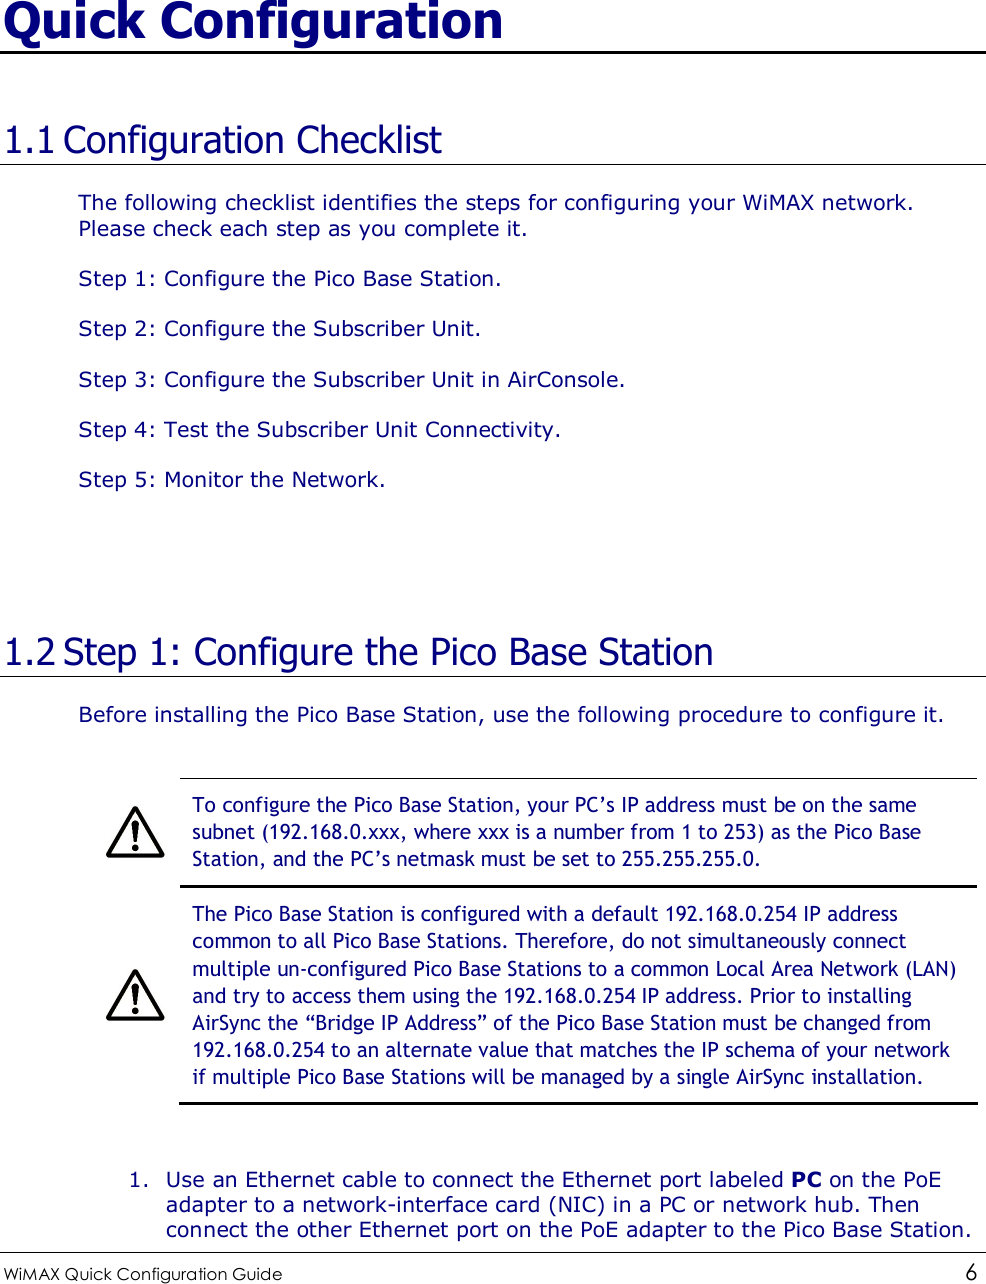  WiMAX Quick Configuration Guide   6    Quick Configuration 1.1 Configuration Checklist The following checklist identifies the steps for configuring your WiMAX network. Please check each step as you complete it. Step 1: Configure the Pico Base Station. Step 2: Configure the Subscriber Unit. Step 3: Configure the Subscriber Unit in AirConsole. Step 4: Test the Subscriber Unit Connectivity. Step 5: Monitor the Network.   1.2 Step 1: Configure the Pico Base Station Before installing the Pico Base Station, use the following procedure to configure it.   To configure the Pico Base Station, your PC’s IP address must be on the same subnet (192.168.0.xxx, where xxx is a number from 1 to 253) as the Pico Base Station, and the PC’s netmask must be set to 255.255.255.0.  The Pico Base Station is configured with a default 192.168.0.254 IP address common to all Pico Base Stations. Therefore, do not simultaneously connect multiple un-configured Pico Base Stations to a common Local Area Network (LAN) and try to access them using the 192.168.0.254 IP address. Prior to installing AirSync the “Bridge IP Address” of the Pico Base Station must be changed from 192.168.0.254 to an alternate value that matches the IP schema of your network if multiple Pico Base Stations will be managed by a single AirSync installation.  1. Use an Ethernet cable to connect the Ethernet port labeled PC on the PoE adapter to a network-interface card (NIC) in a PC or network hub. Then connect the other Ethernet port on the PoE adapter to the Pico Base Station. 